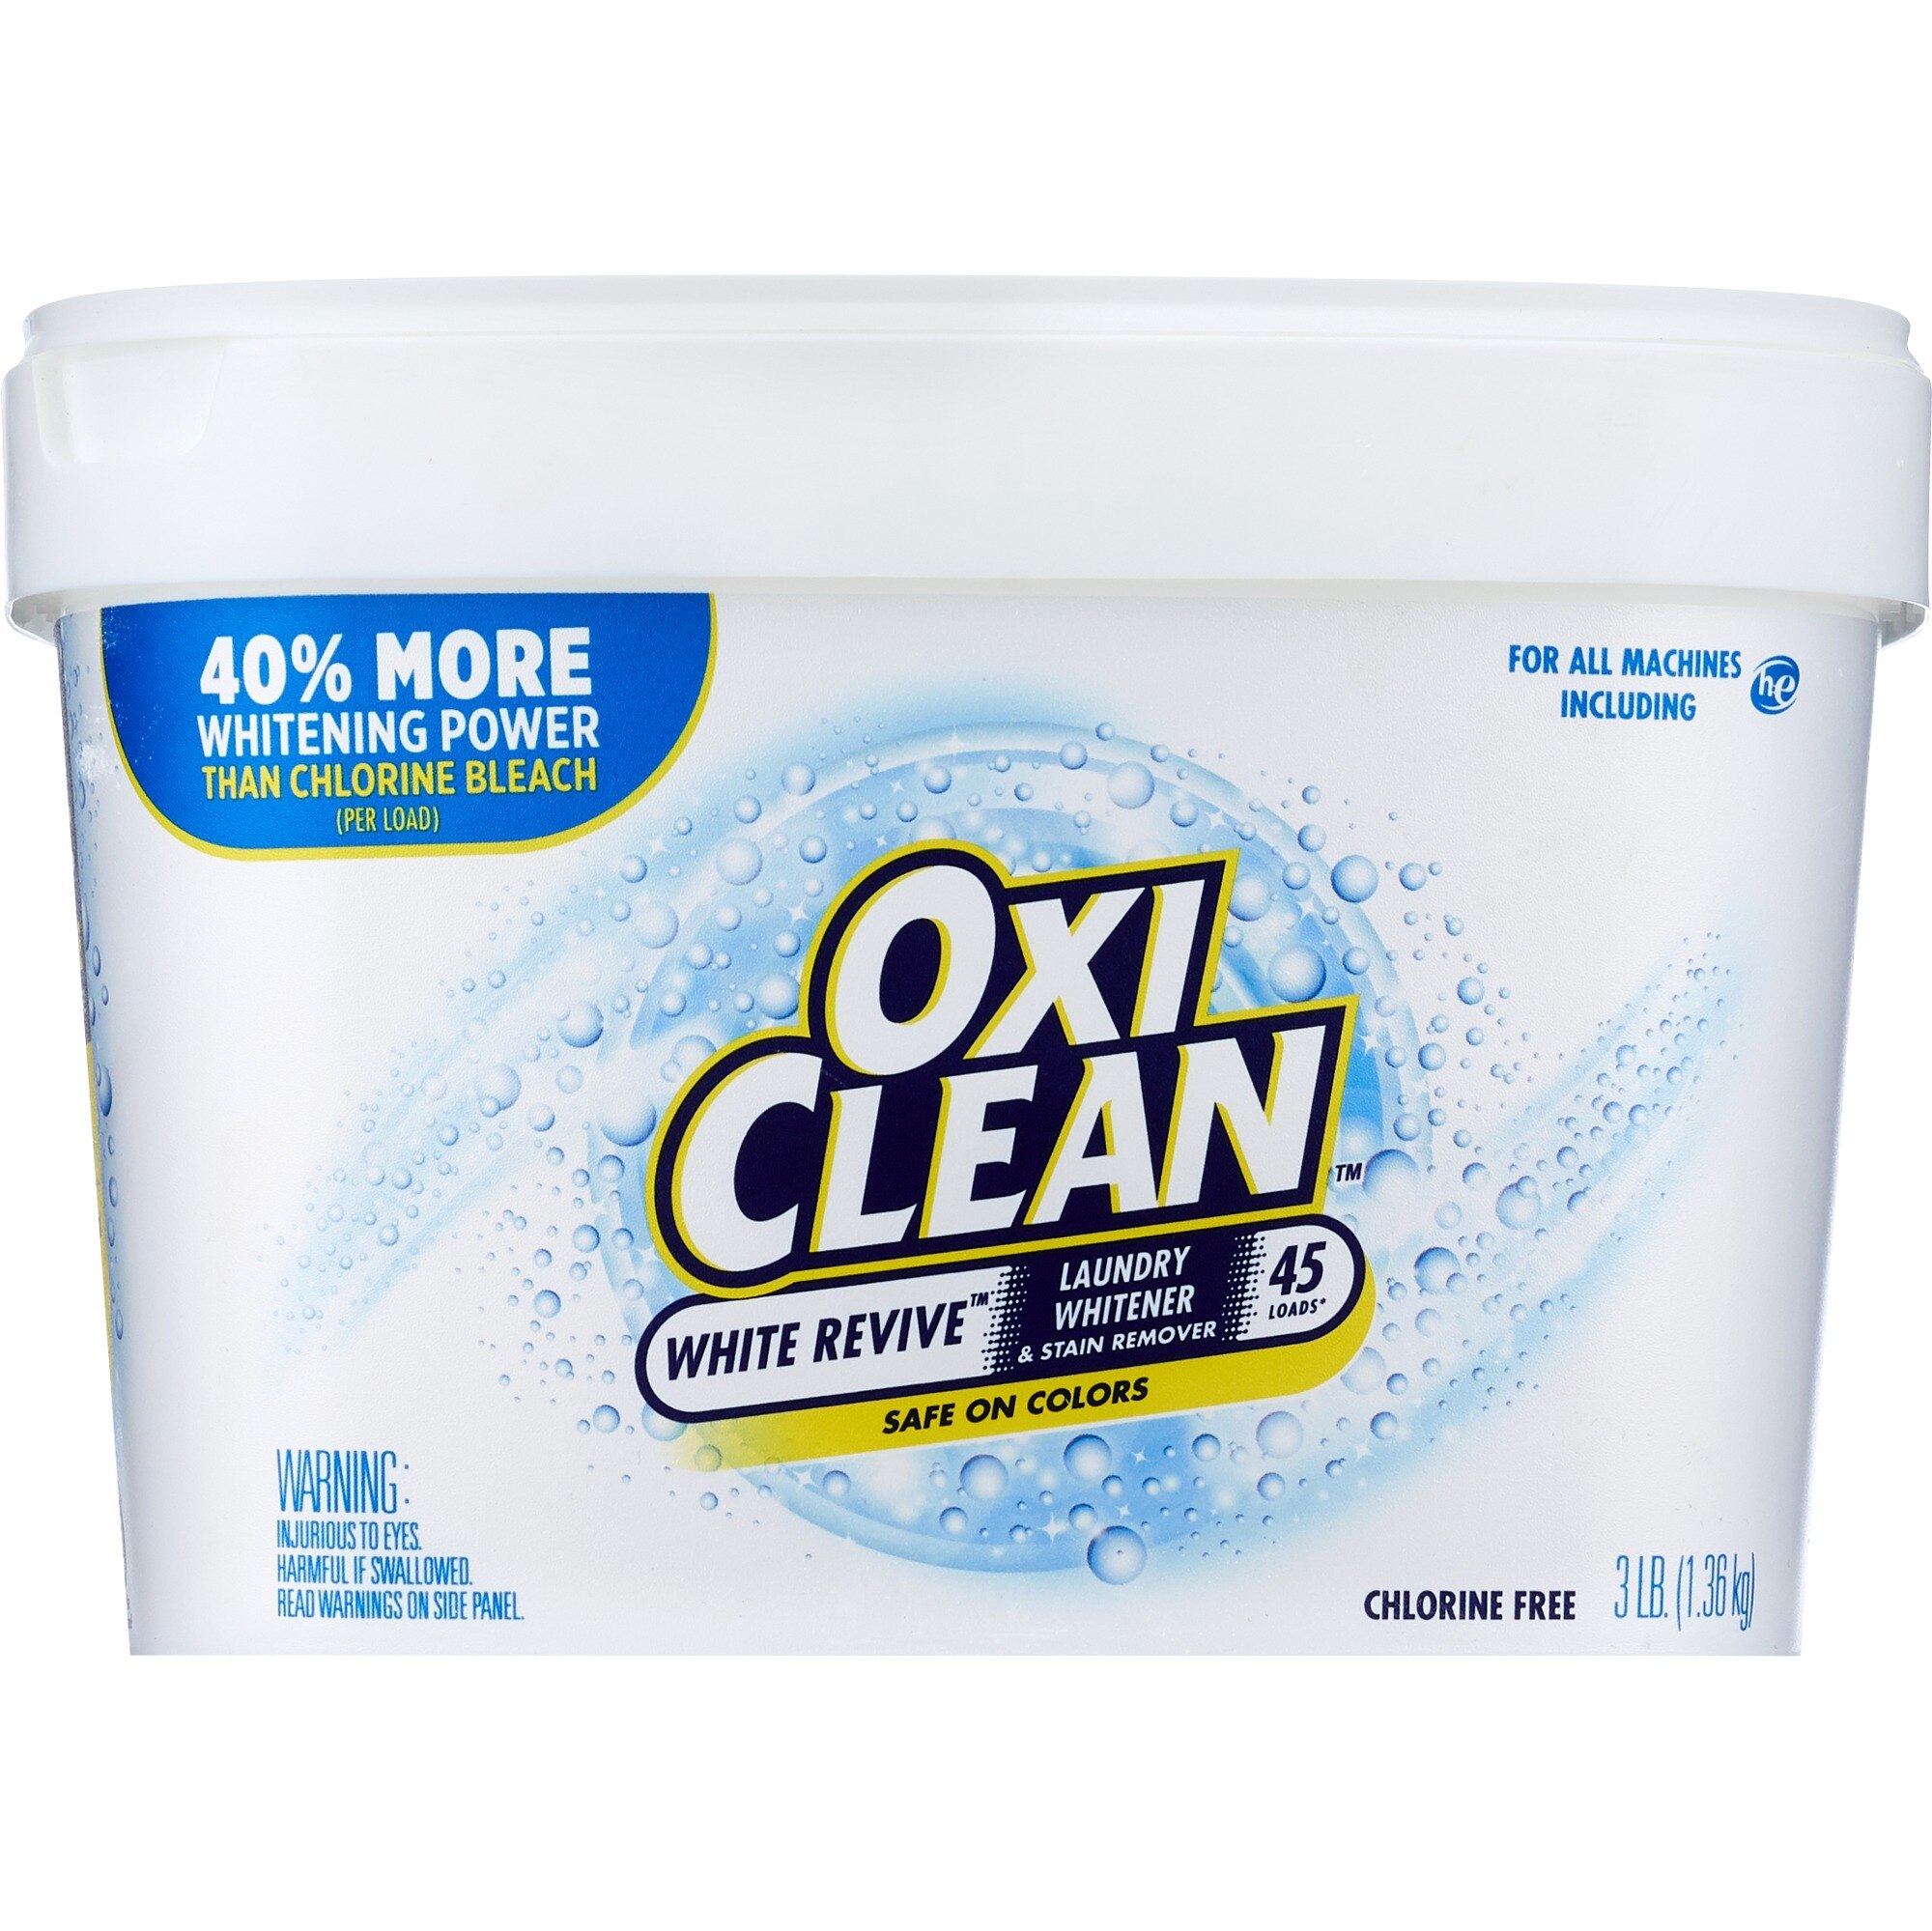 OxiClean Laundry Whitener + Stain Remover, White Revive, 3 LB